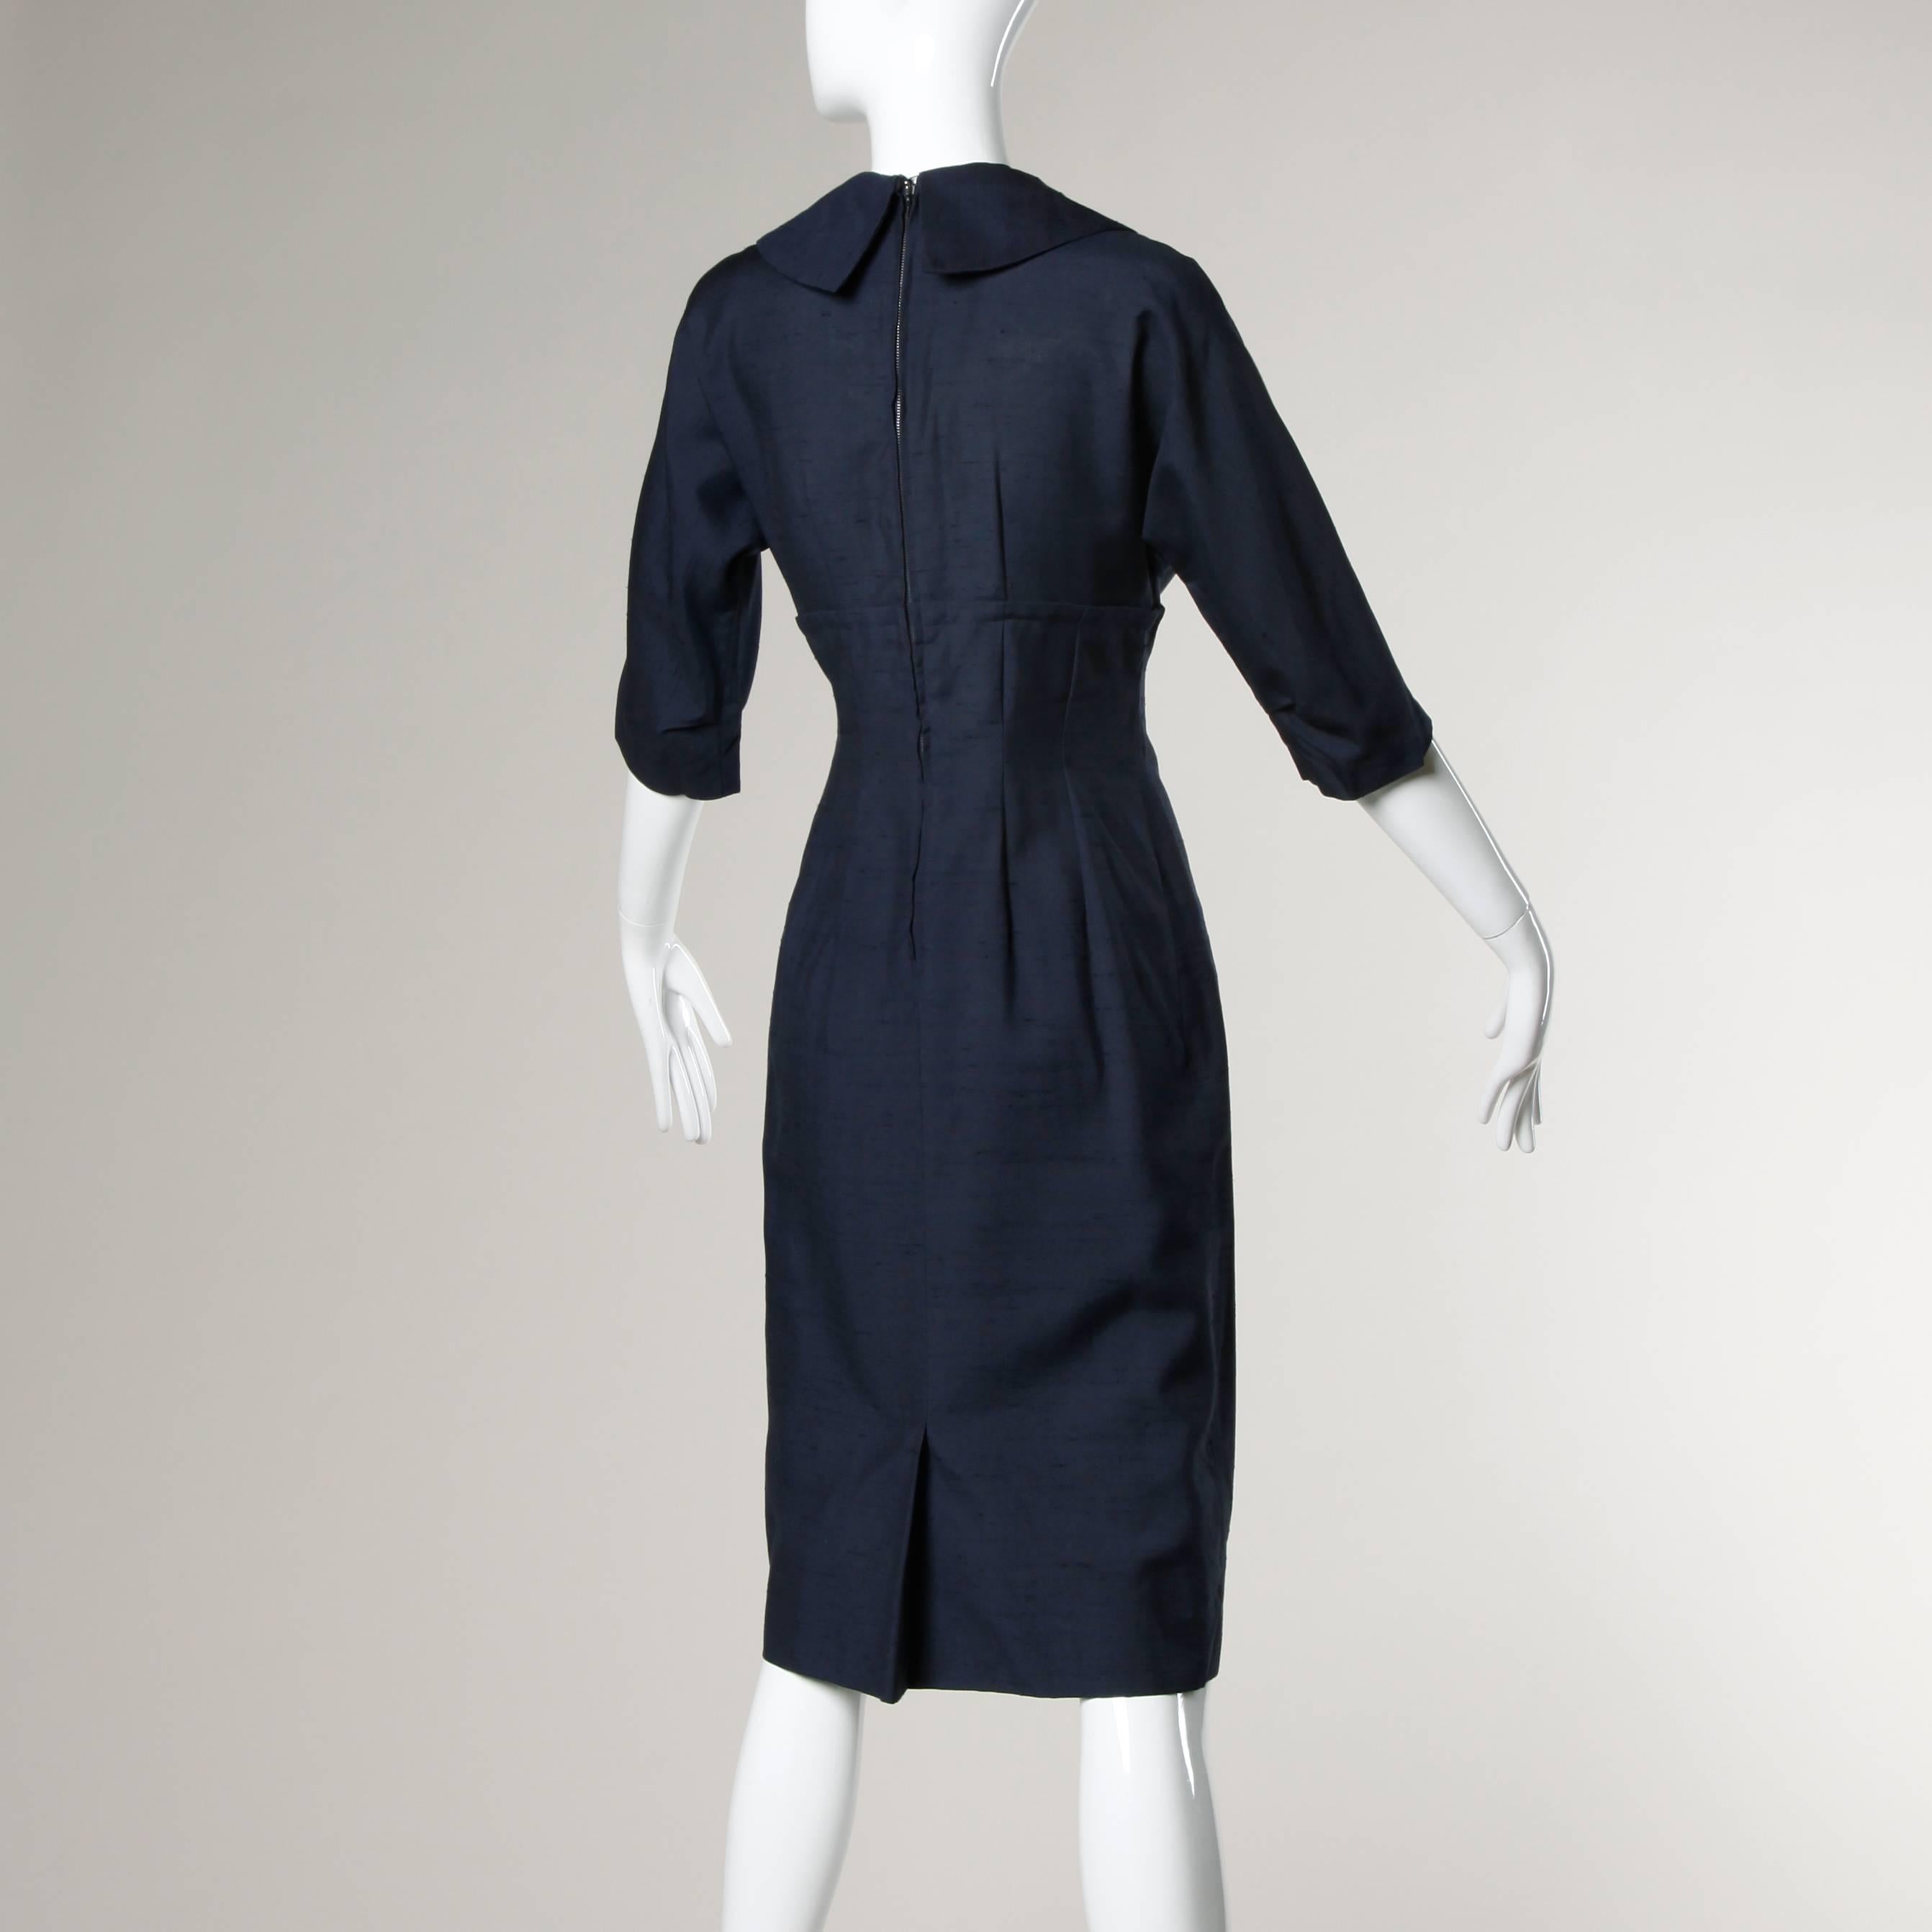 Black 1950s Vintage  Navy Blue Bombshell Wiggle Dress with Buckle Detail